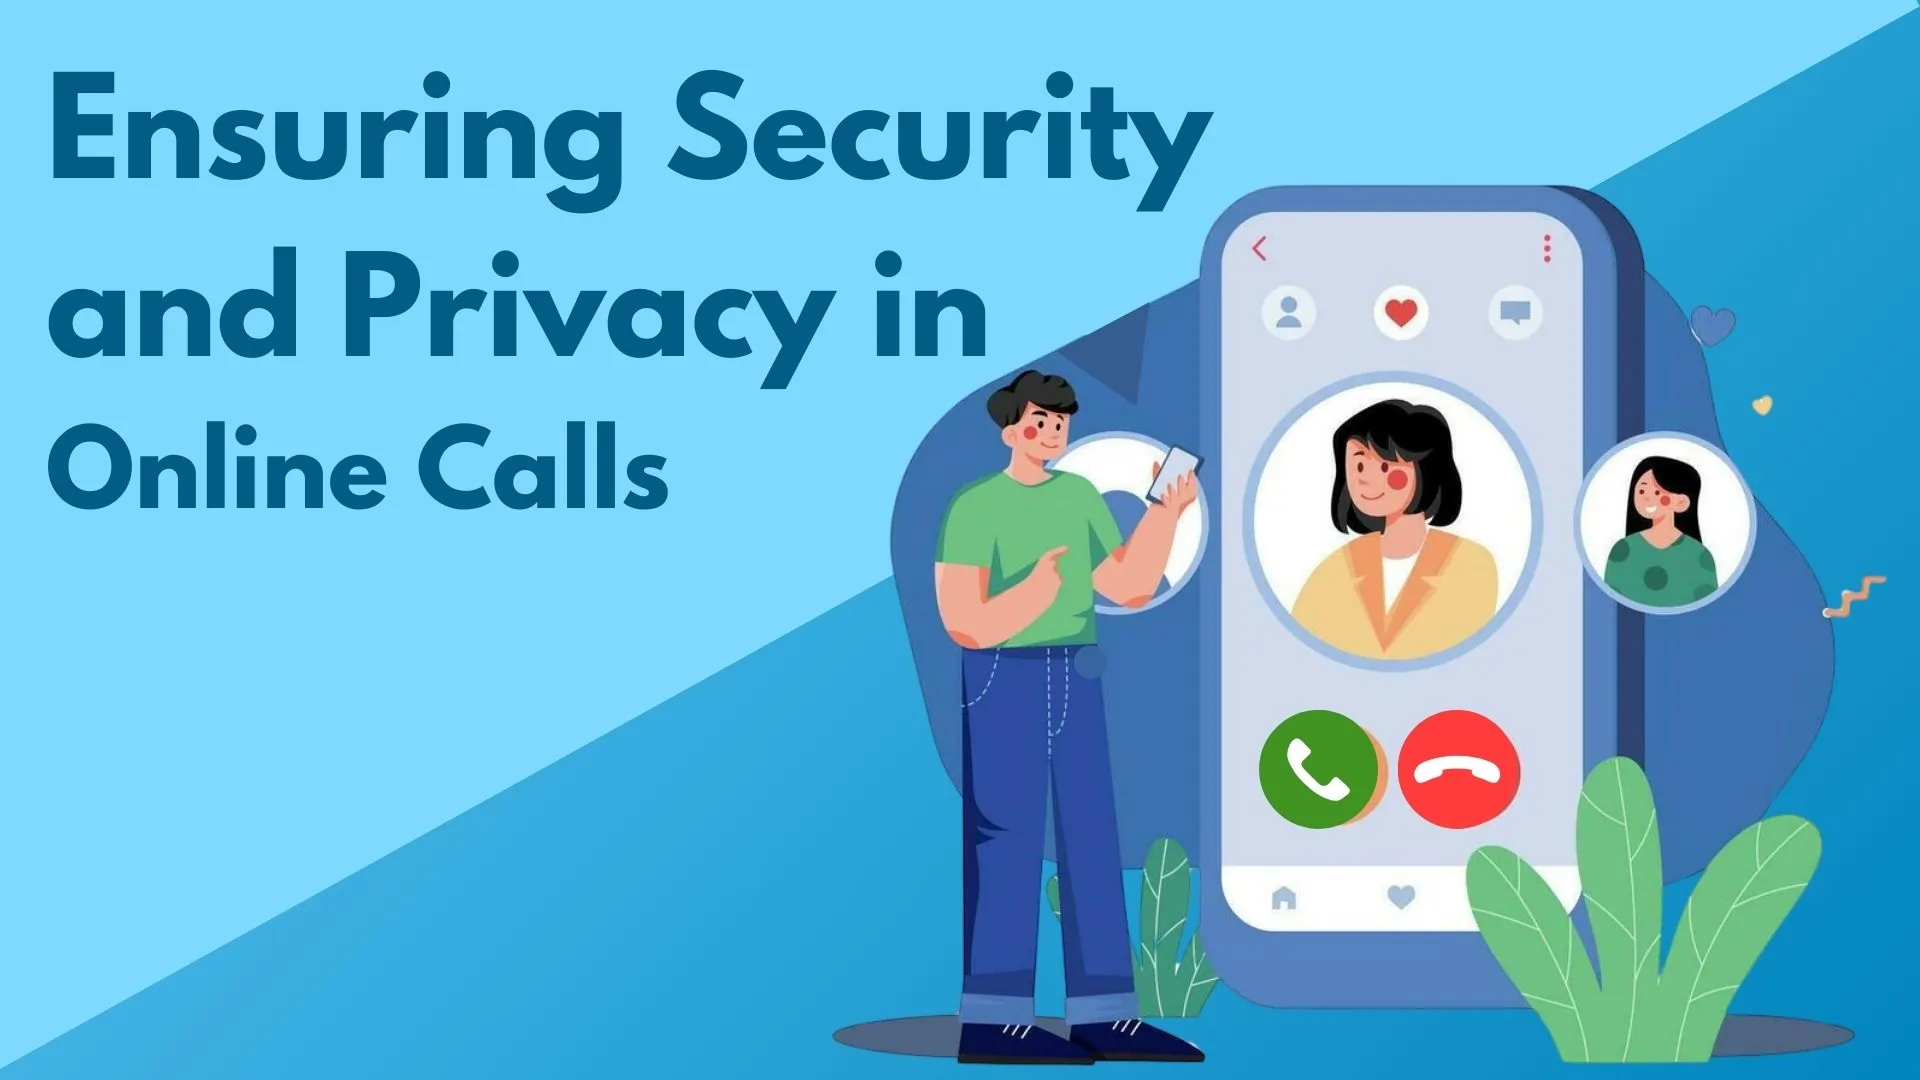 Ensuring Security and Privacy in Online Calls